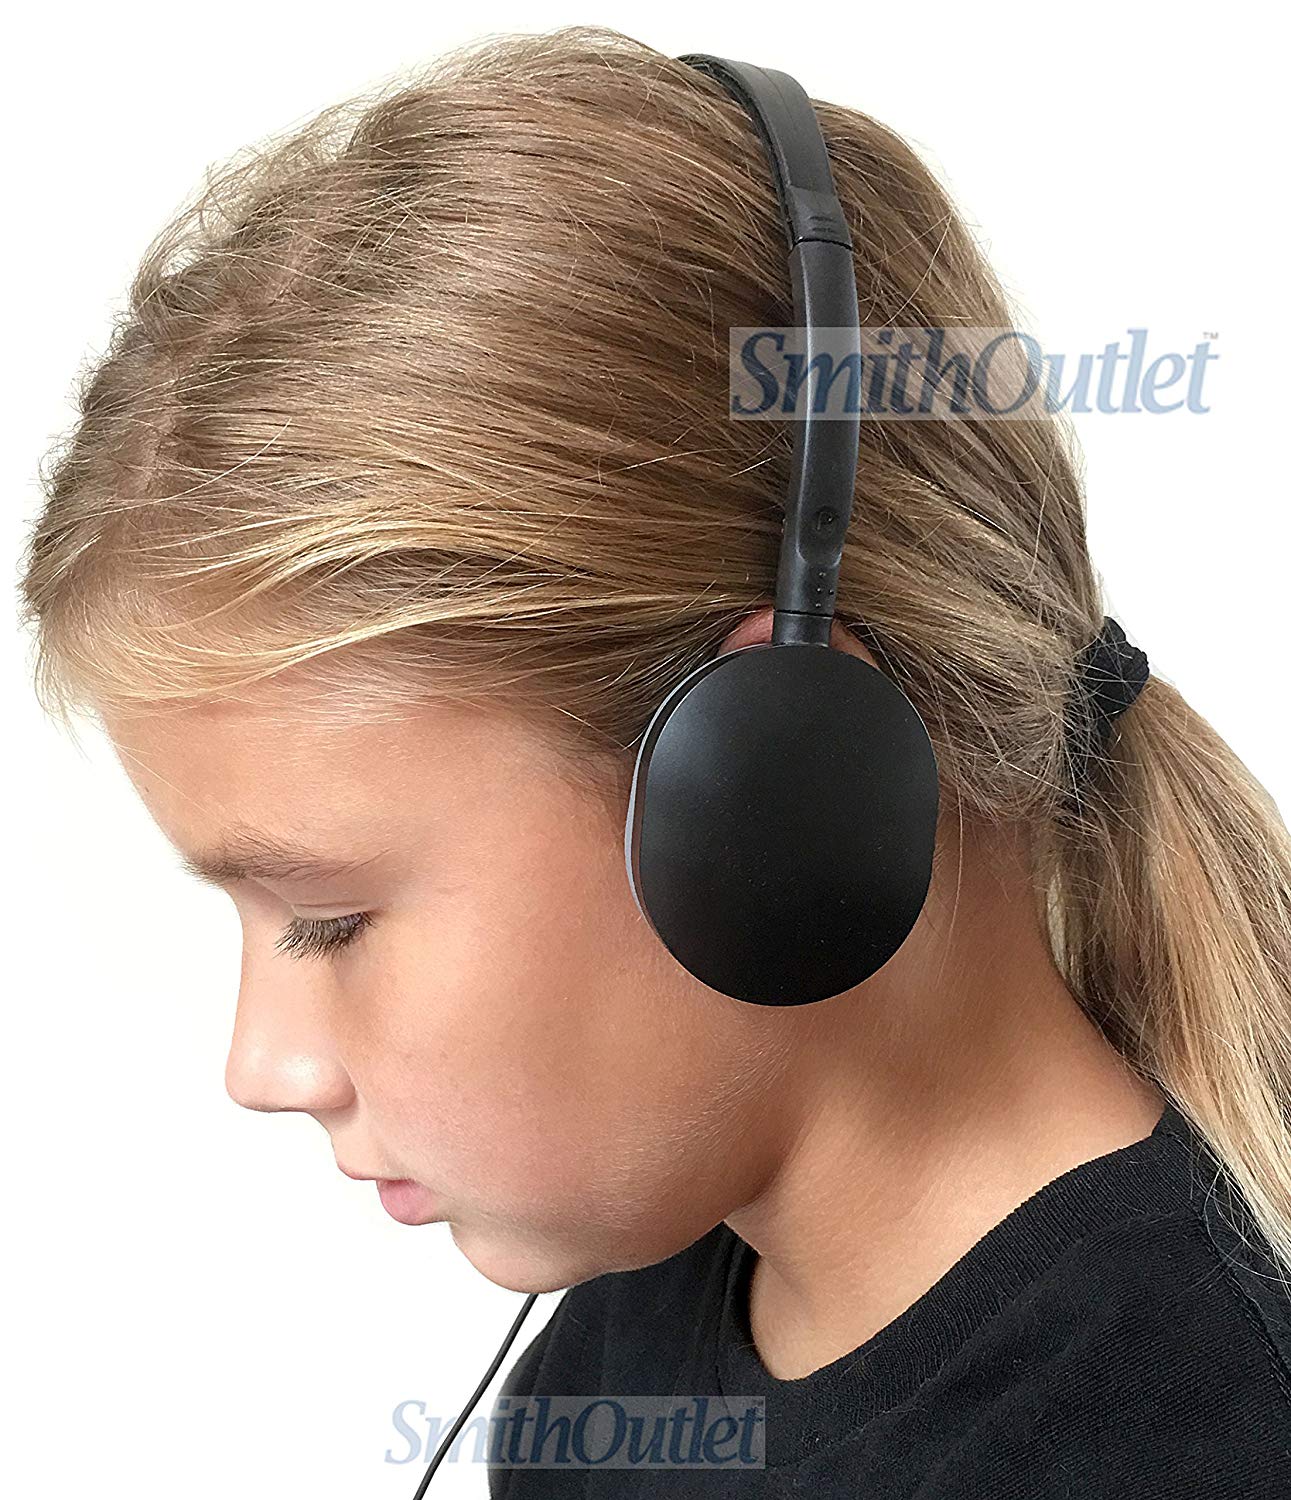 SmithOutlet Rubber Earpad Headphones in Use in a Classroom Environment